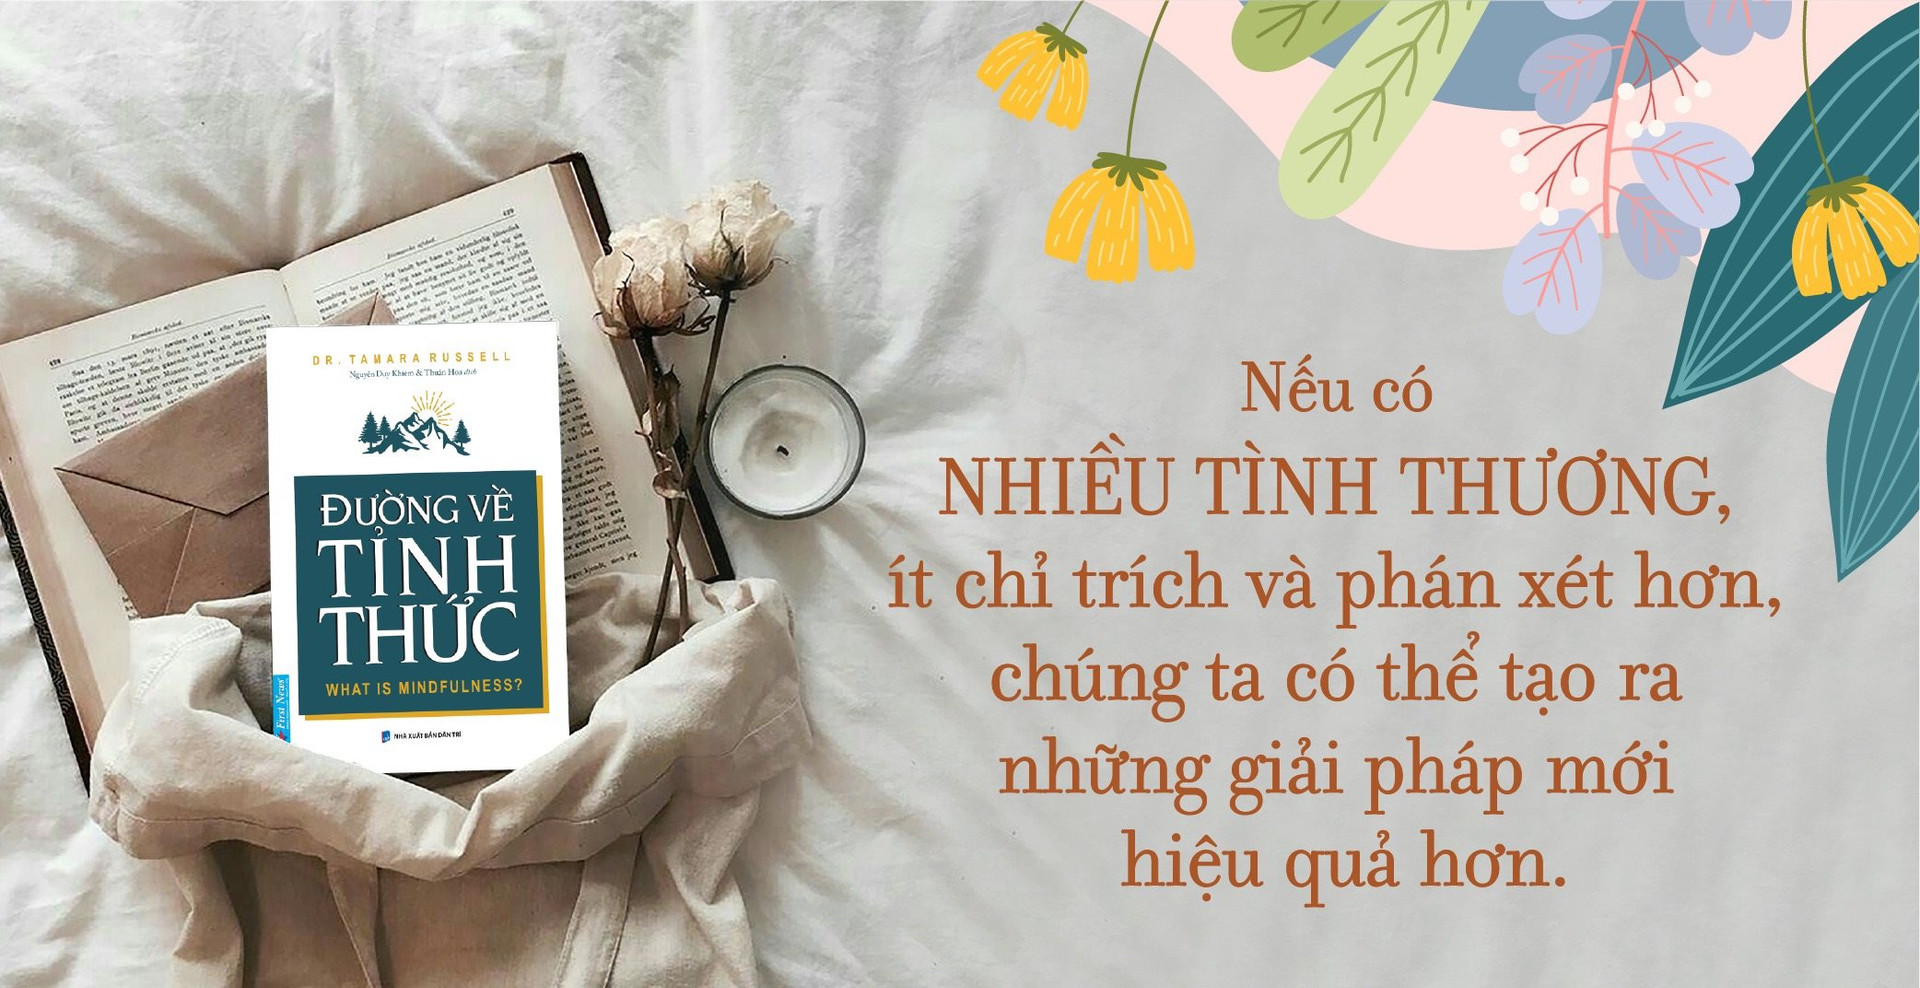 quote-duong-ve-tinh-thuc-1.jpg